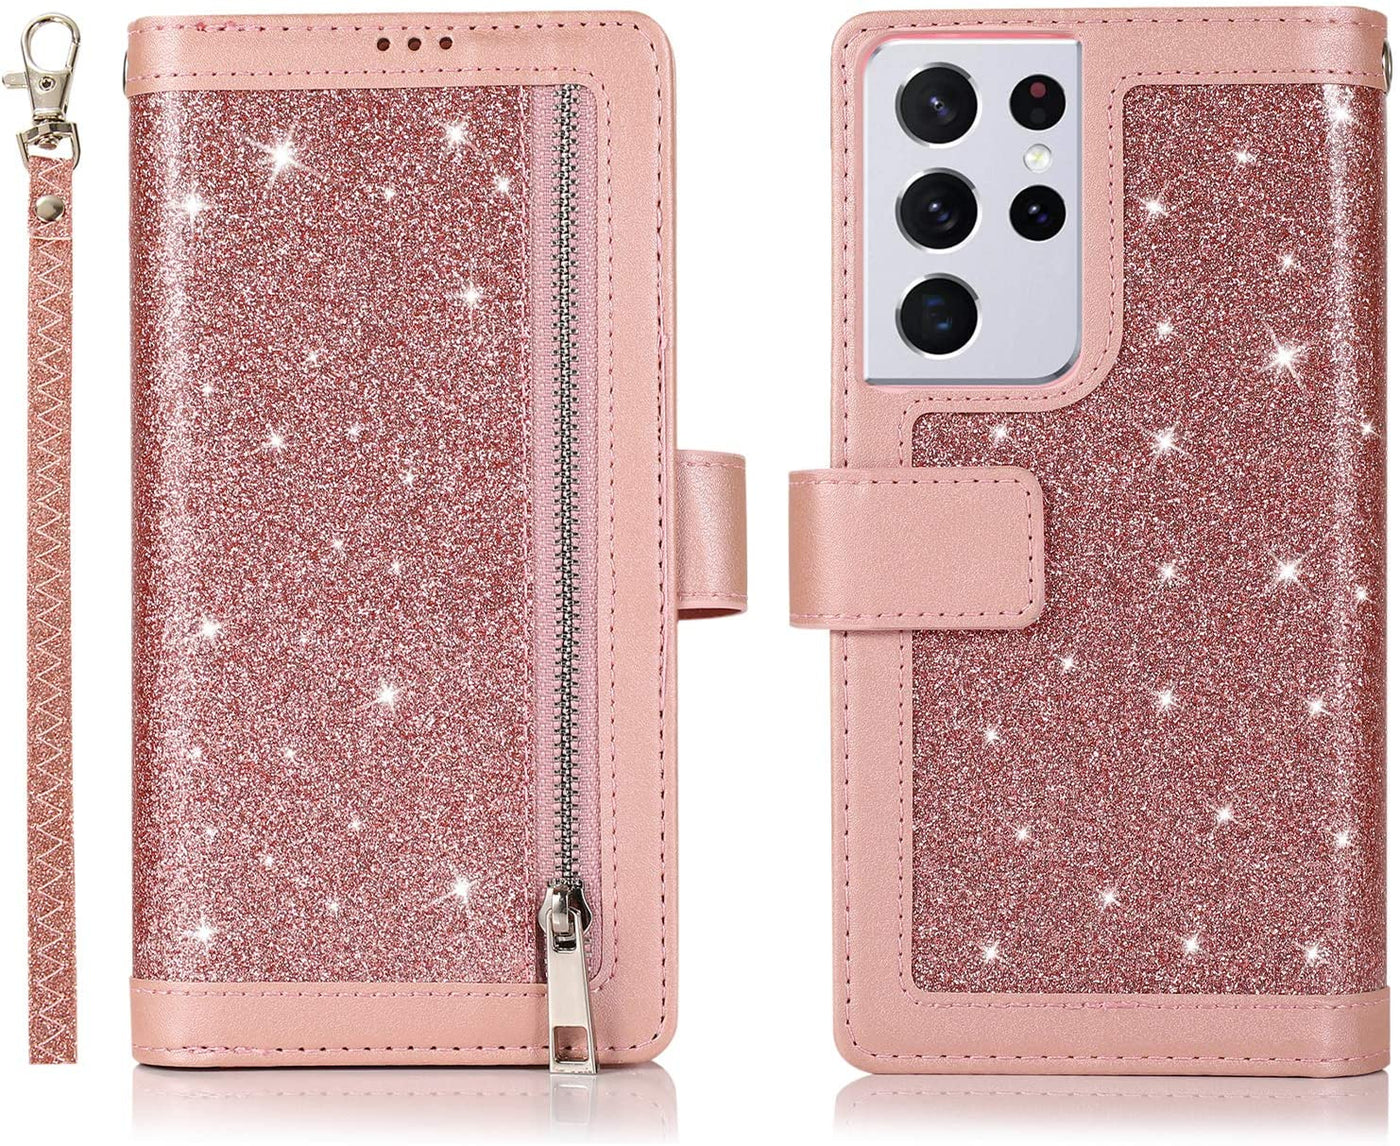 Excelsior Premium Leather Glitter Wallet Flip Case Cover | Trifold Purse Clutch For Samsung Galaxy S21 Ultra